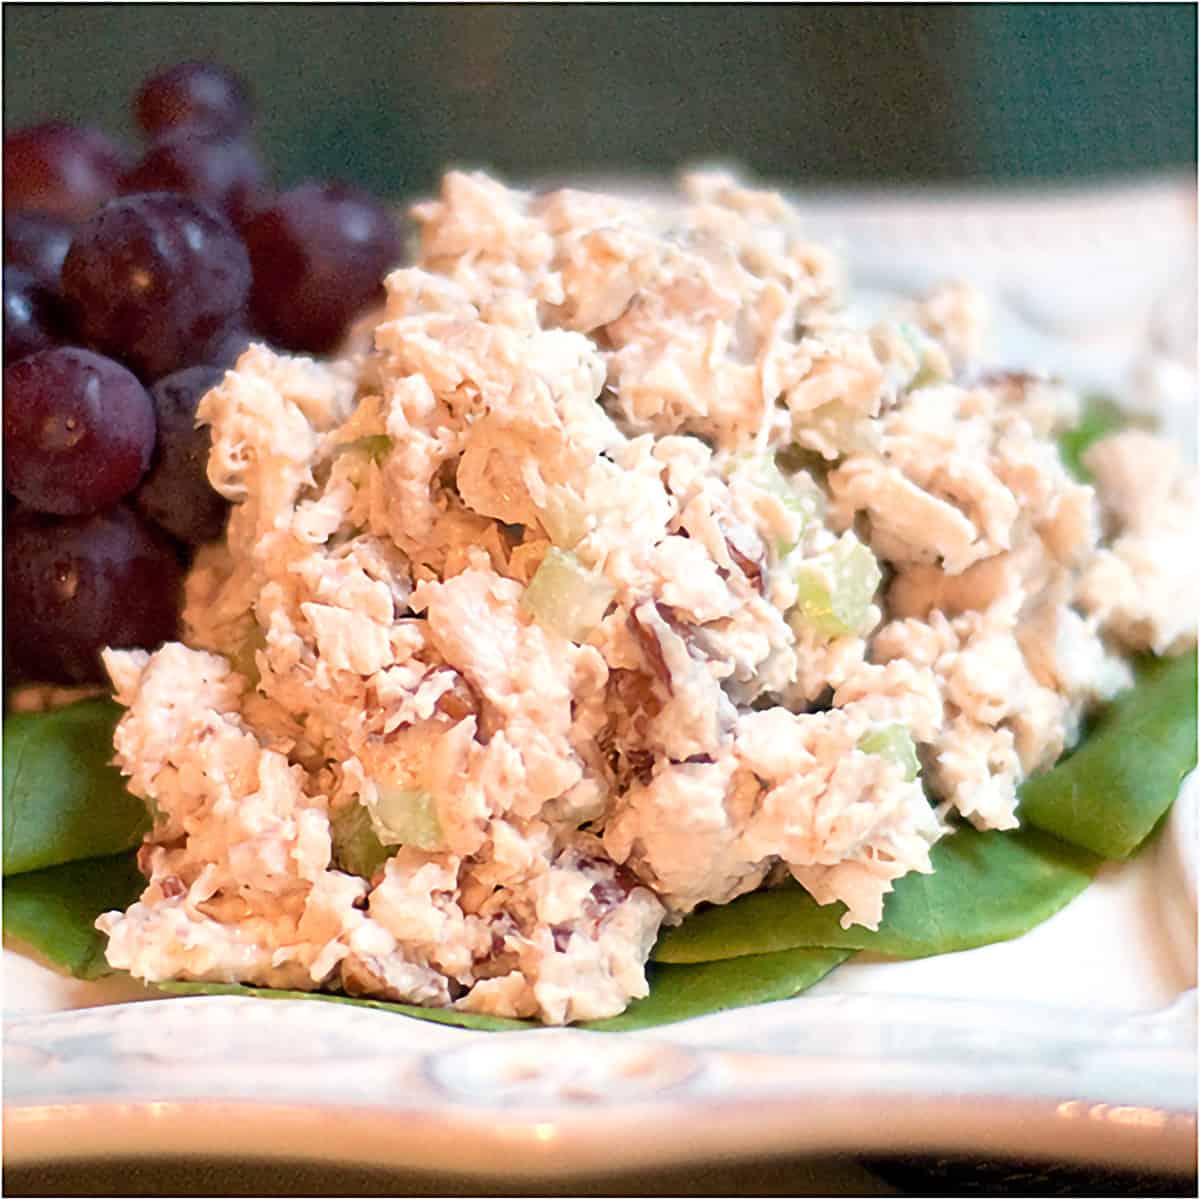 Chicken salad mounded on a serving plate.